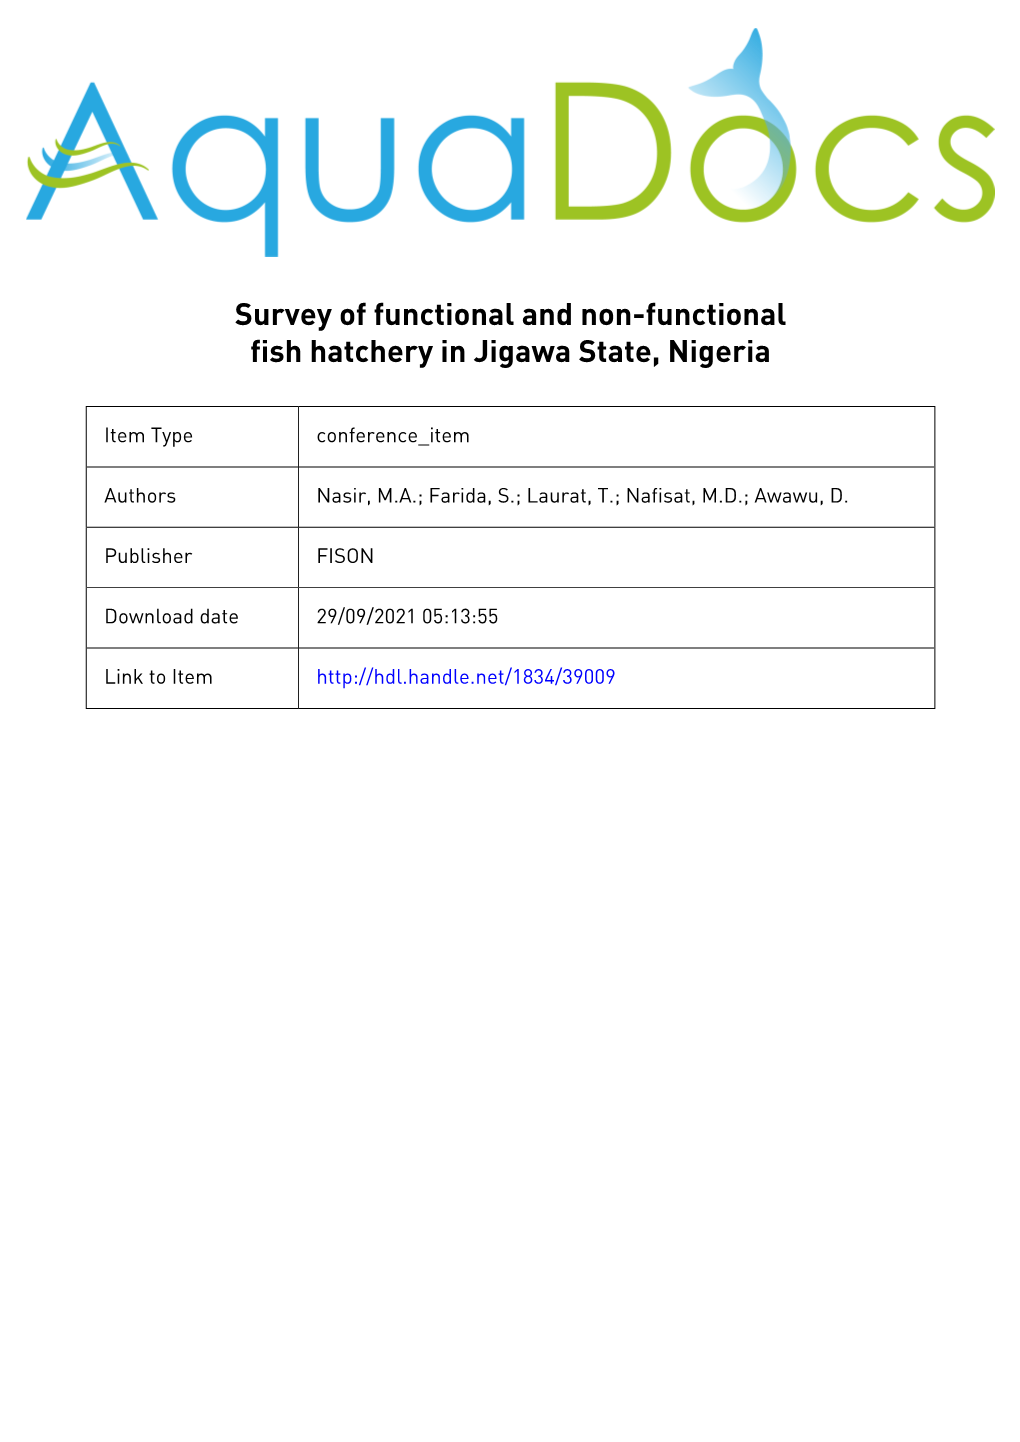 Survey of Functional and Non-Functional Fish Hatchery in Jigawa State, Nigeria